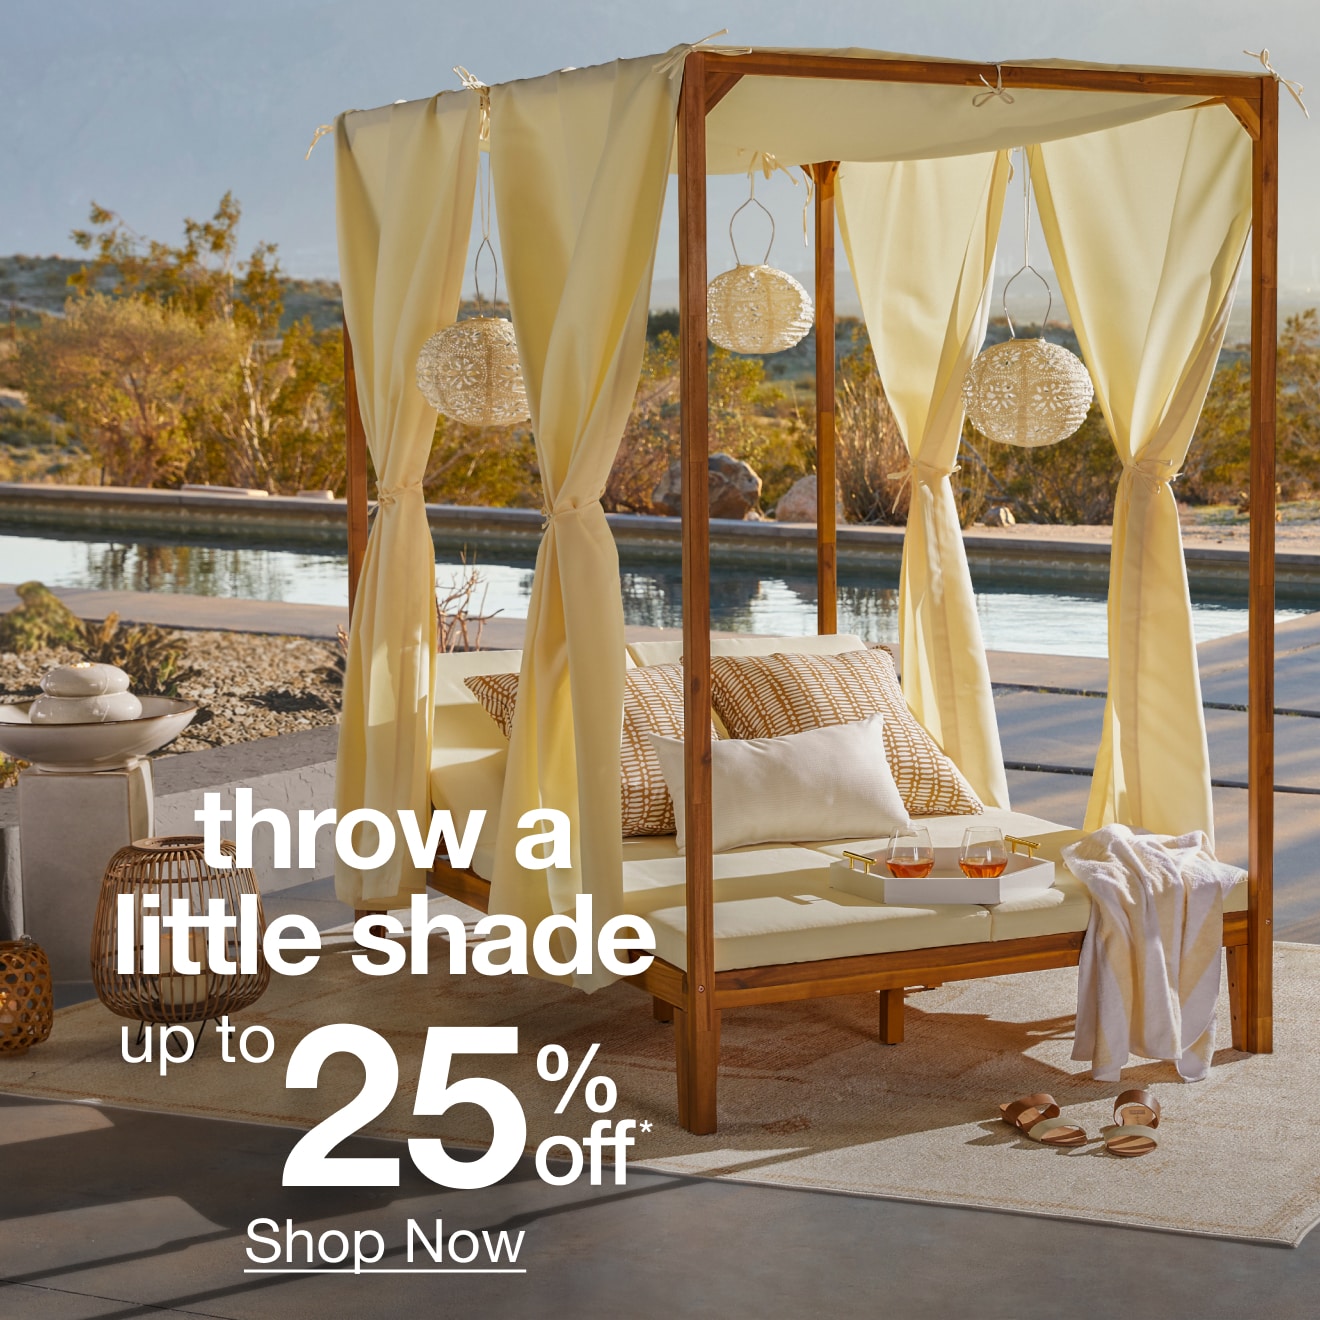 Up to 25% Off Outdoor Shades & Structures